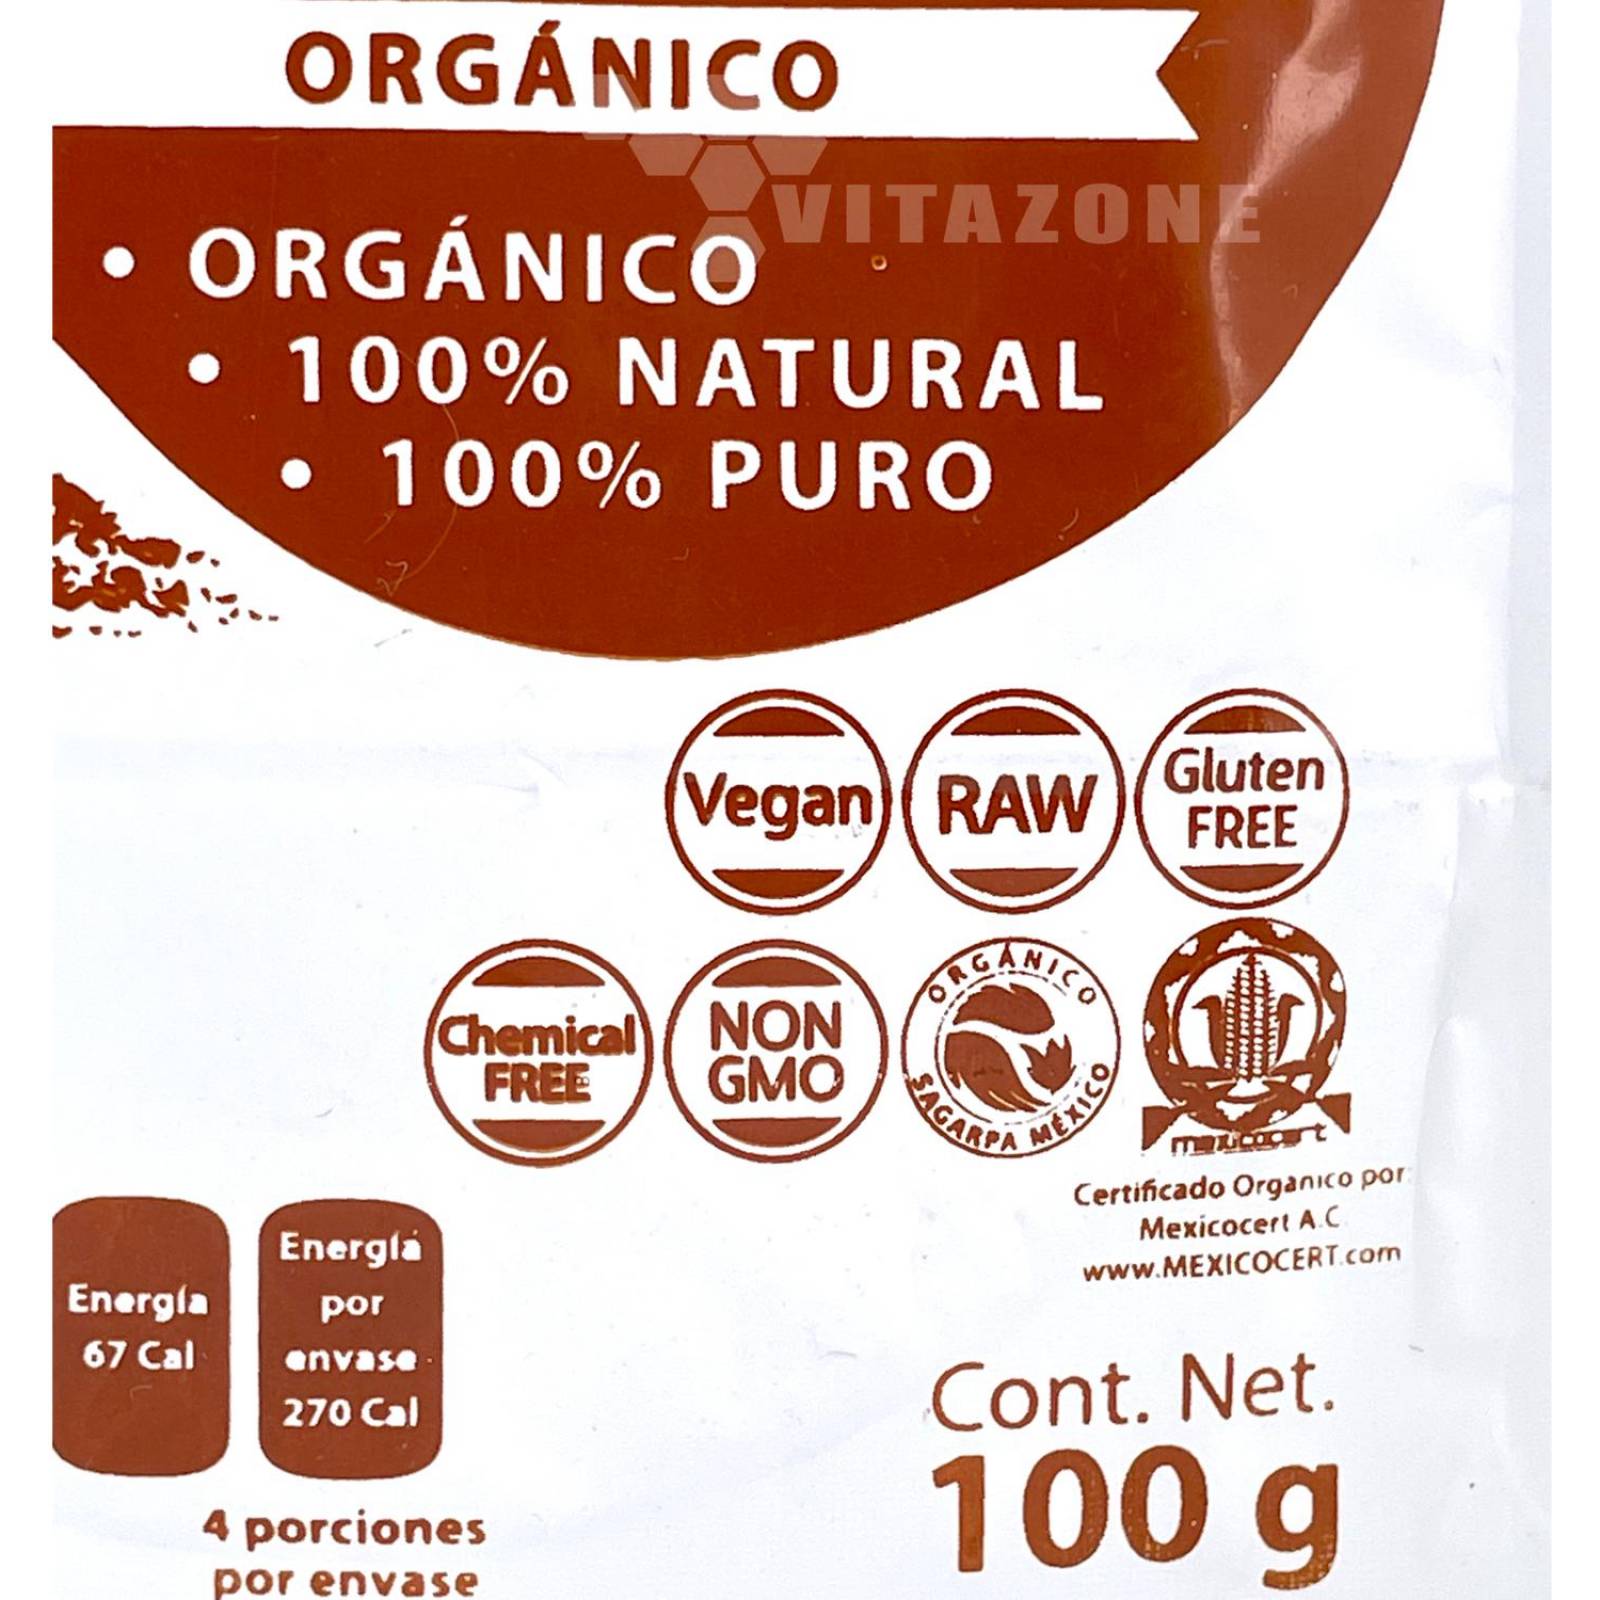 Cacao en polvo Orgánico 100 grs Welthy Superfoods Cert. 